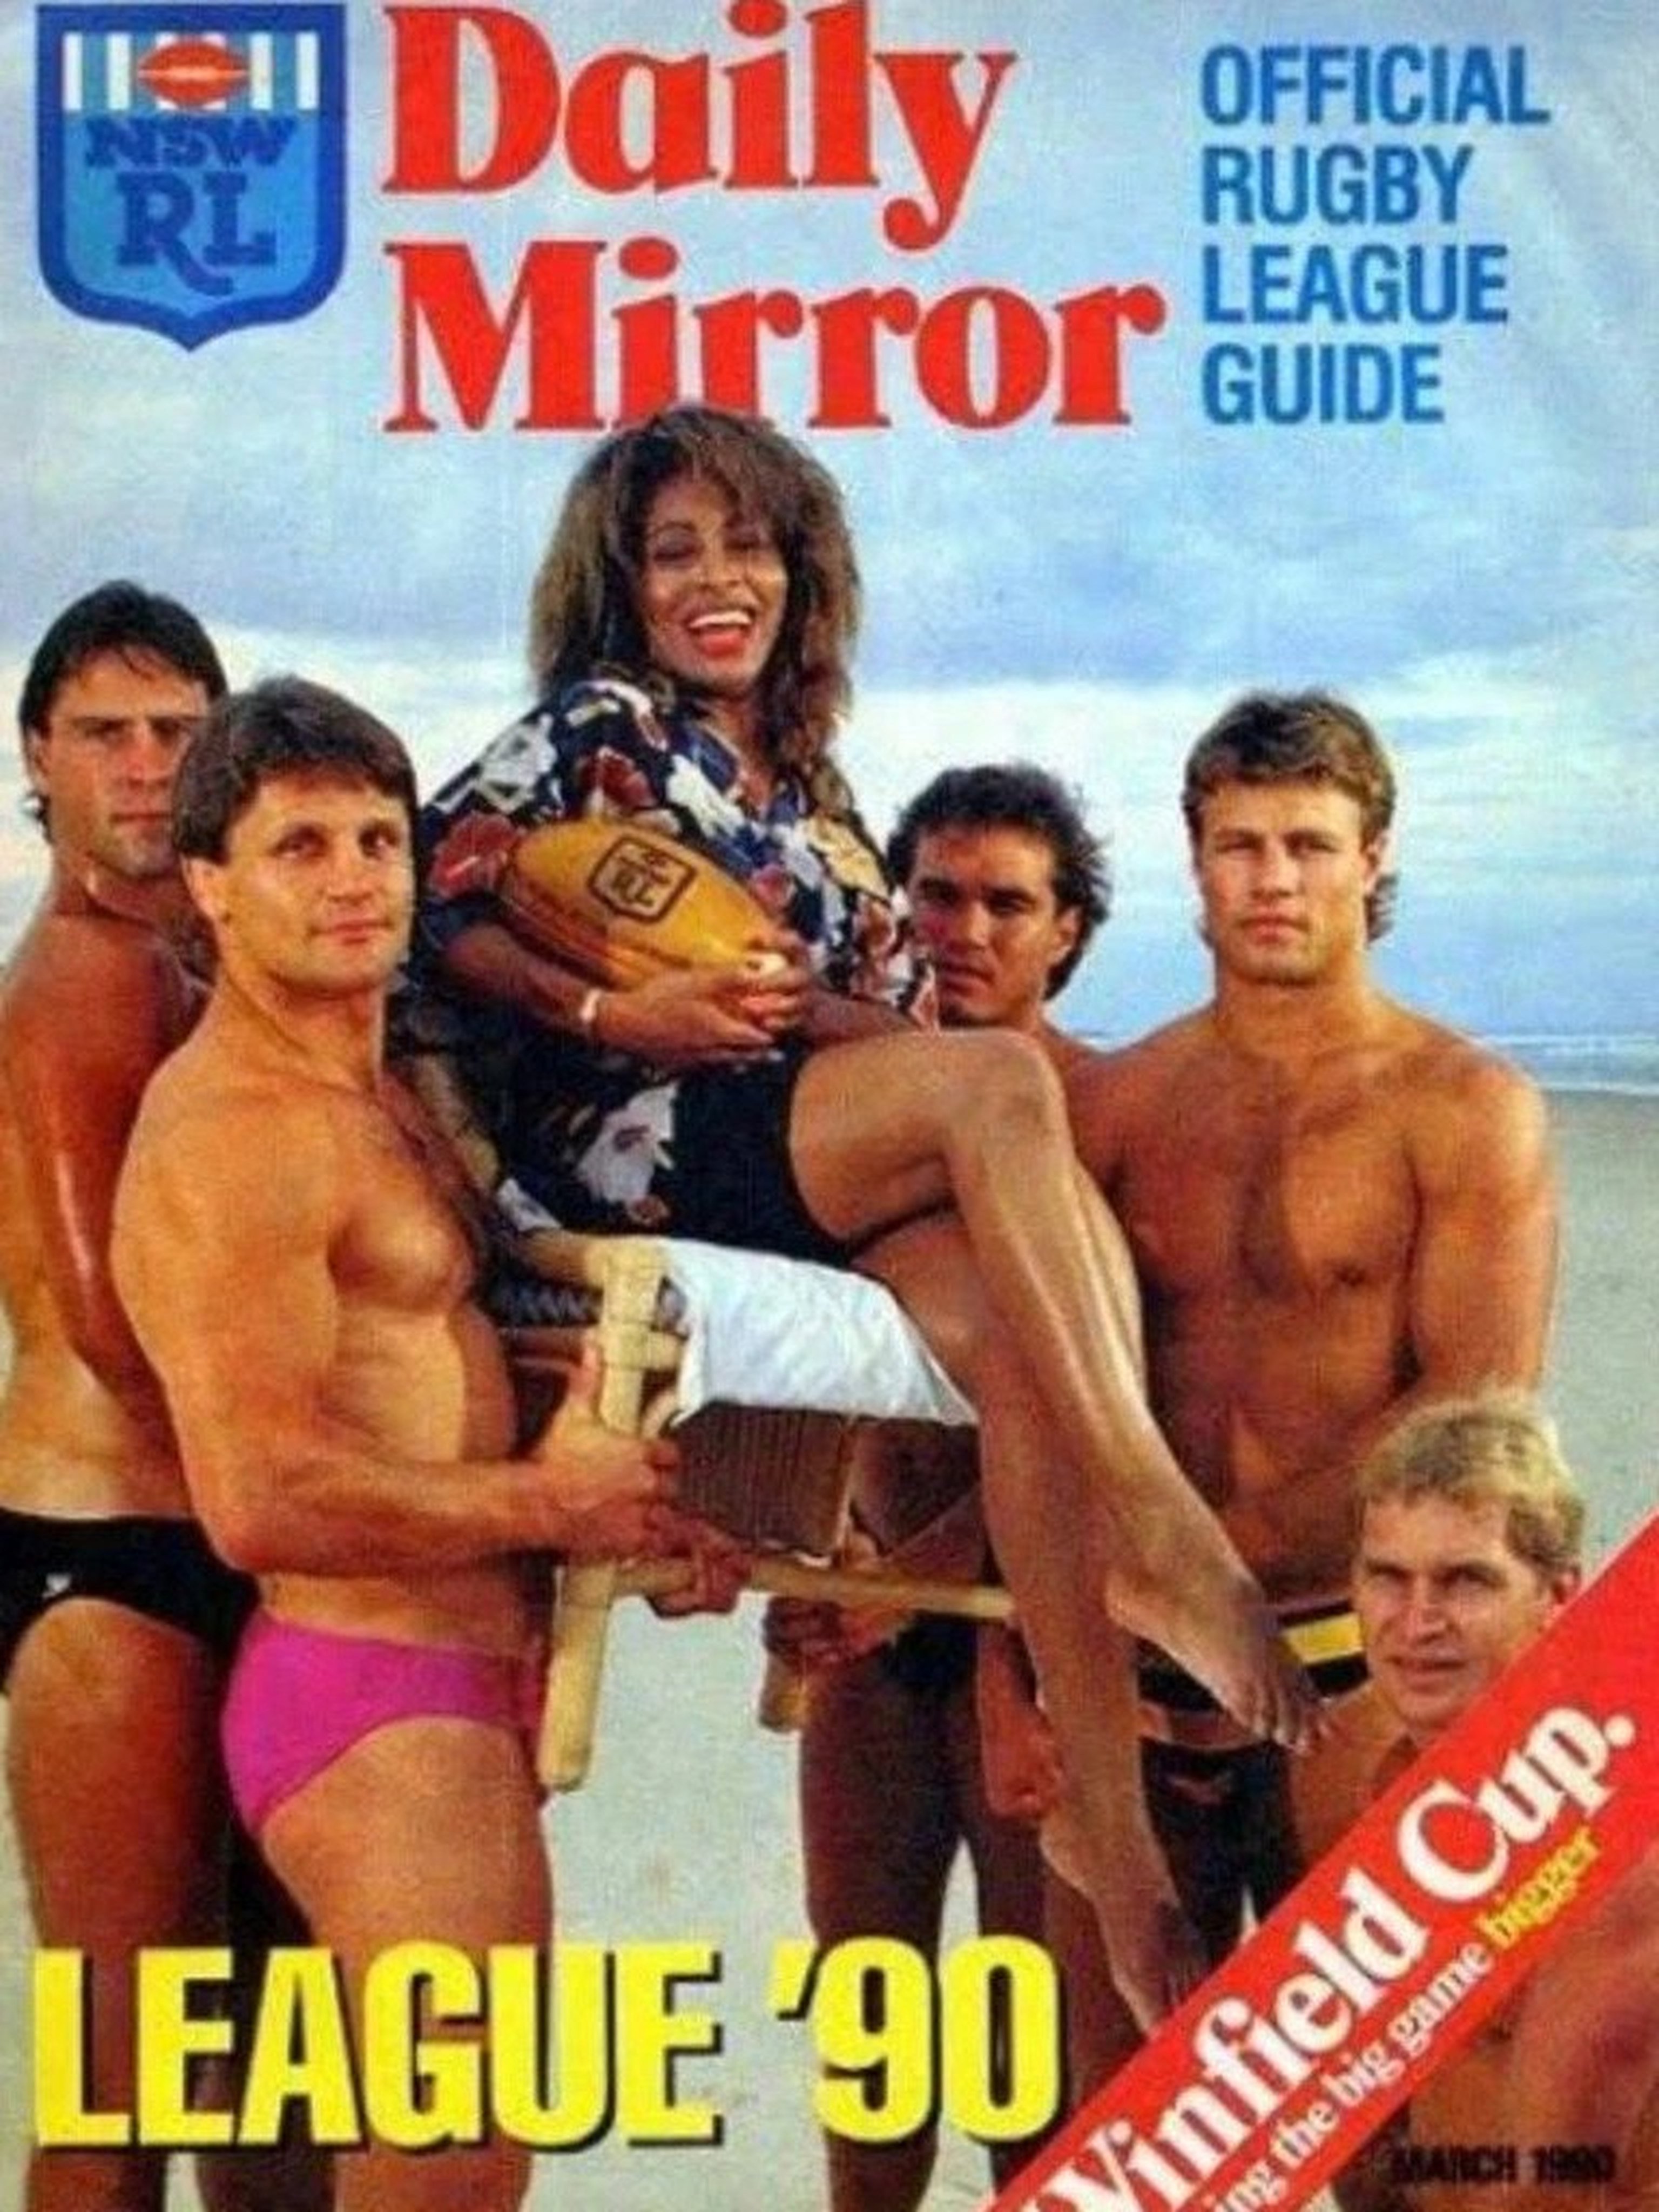 Tina Turner was the face of the rugby league, Daily Mirror March 1990.